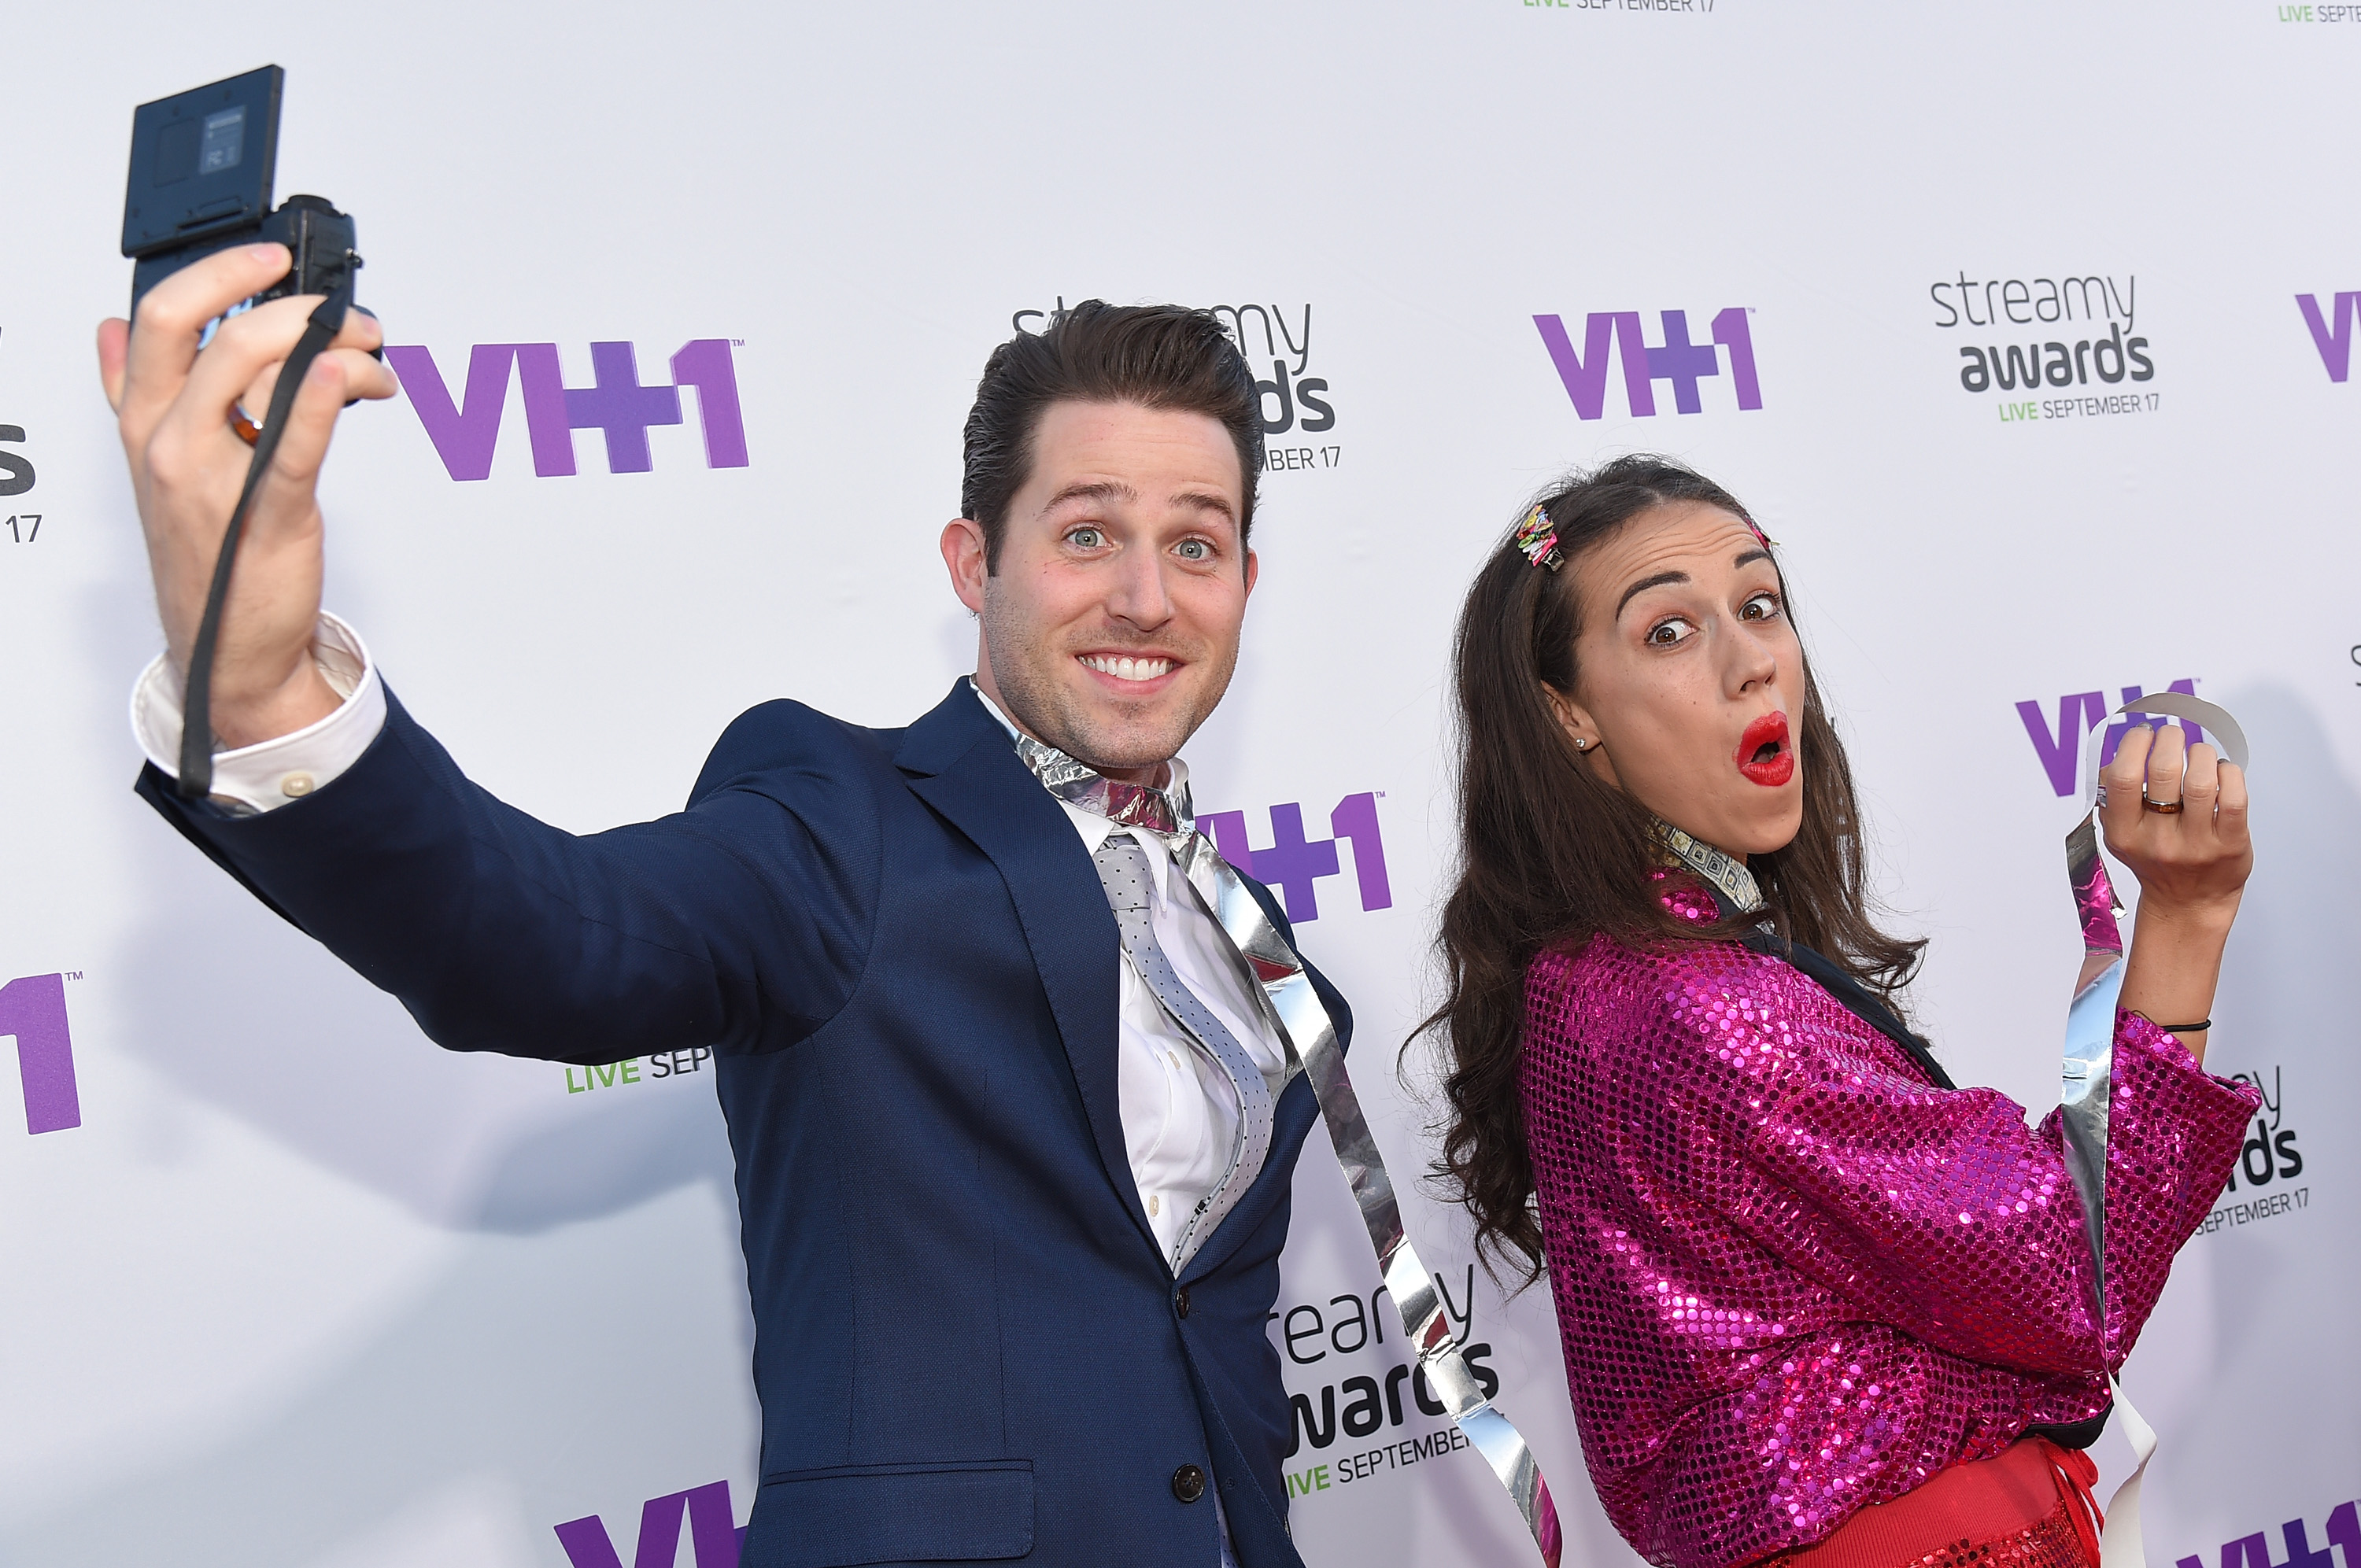 Colleen Ballingers Husbands The Youtube Stars Past Marriage To Joshua David Evans And Current